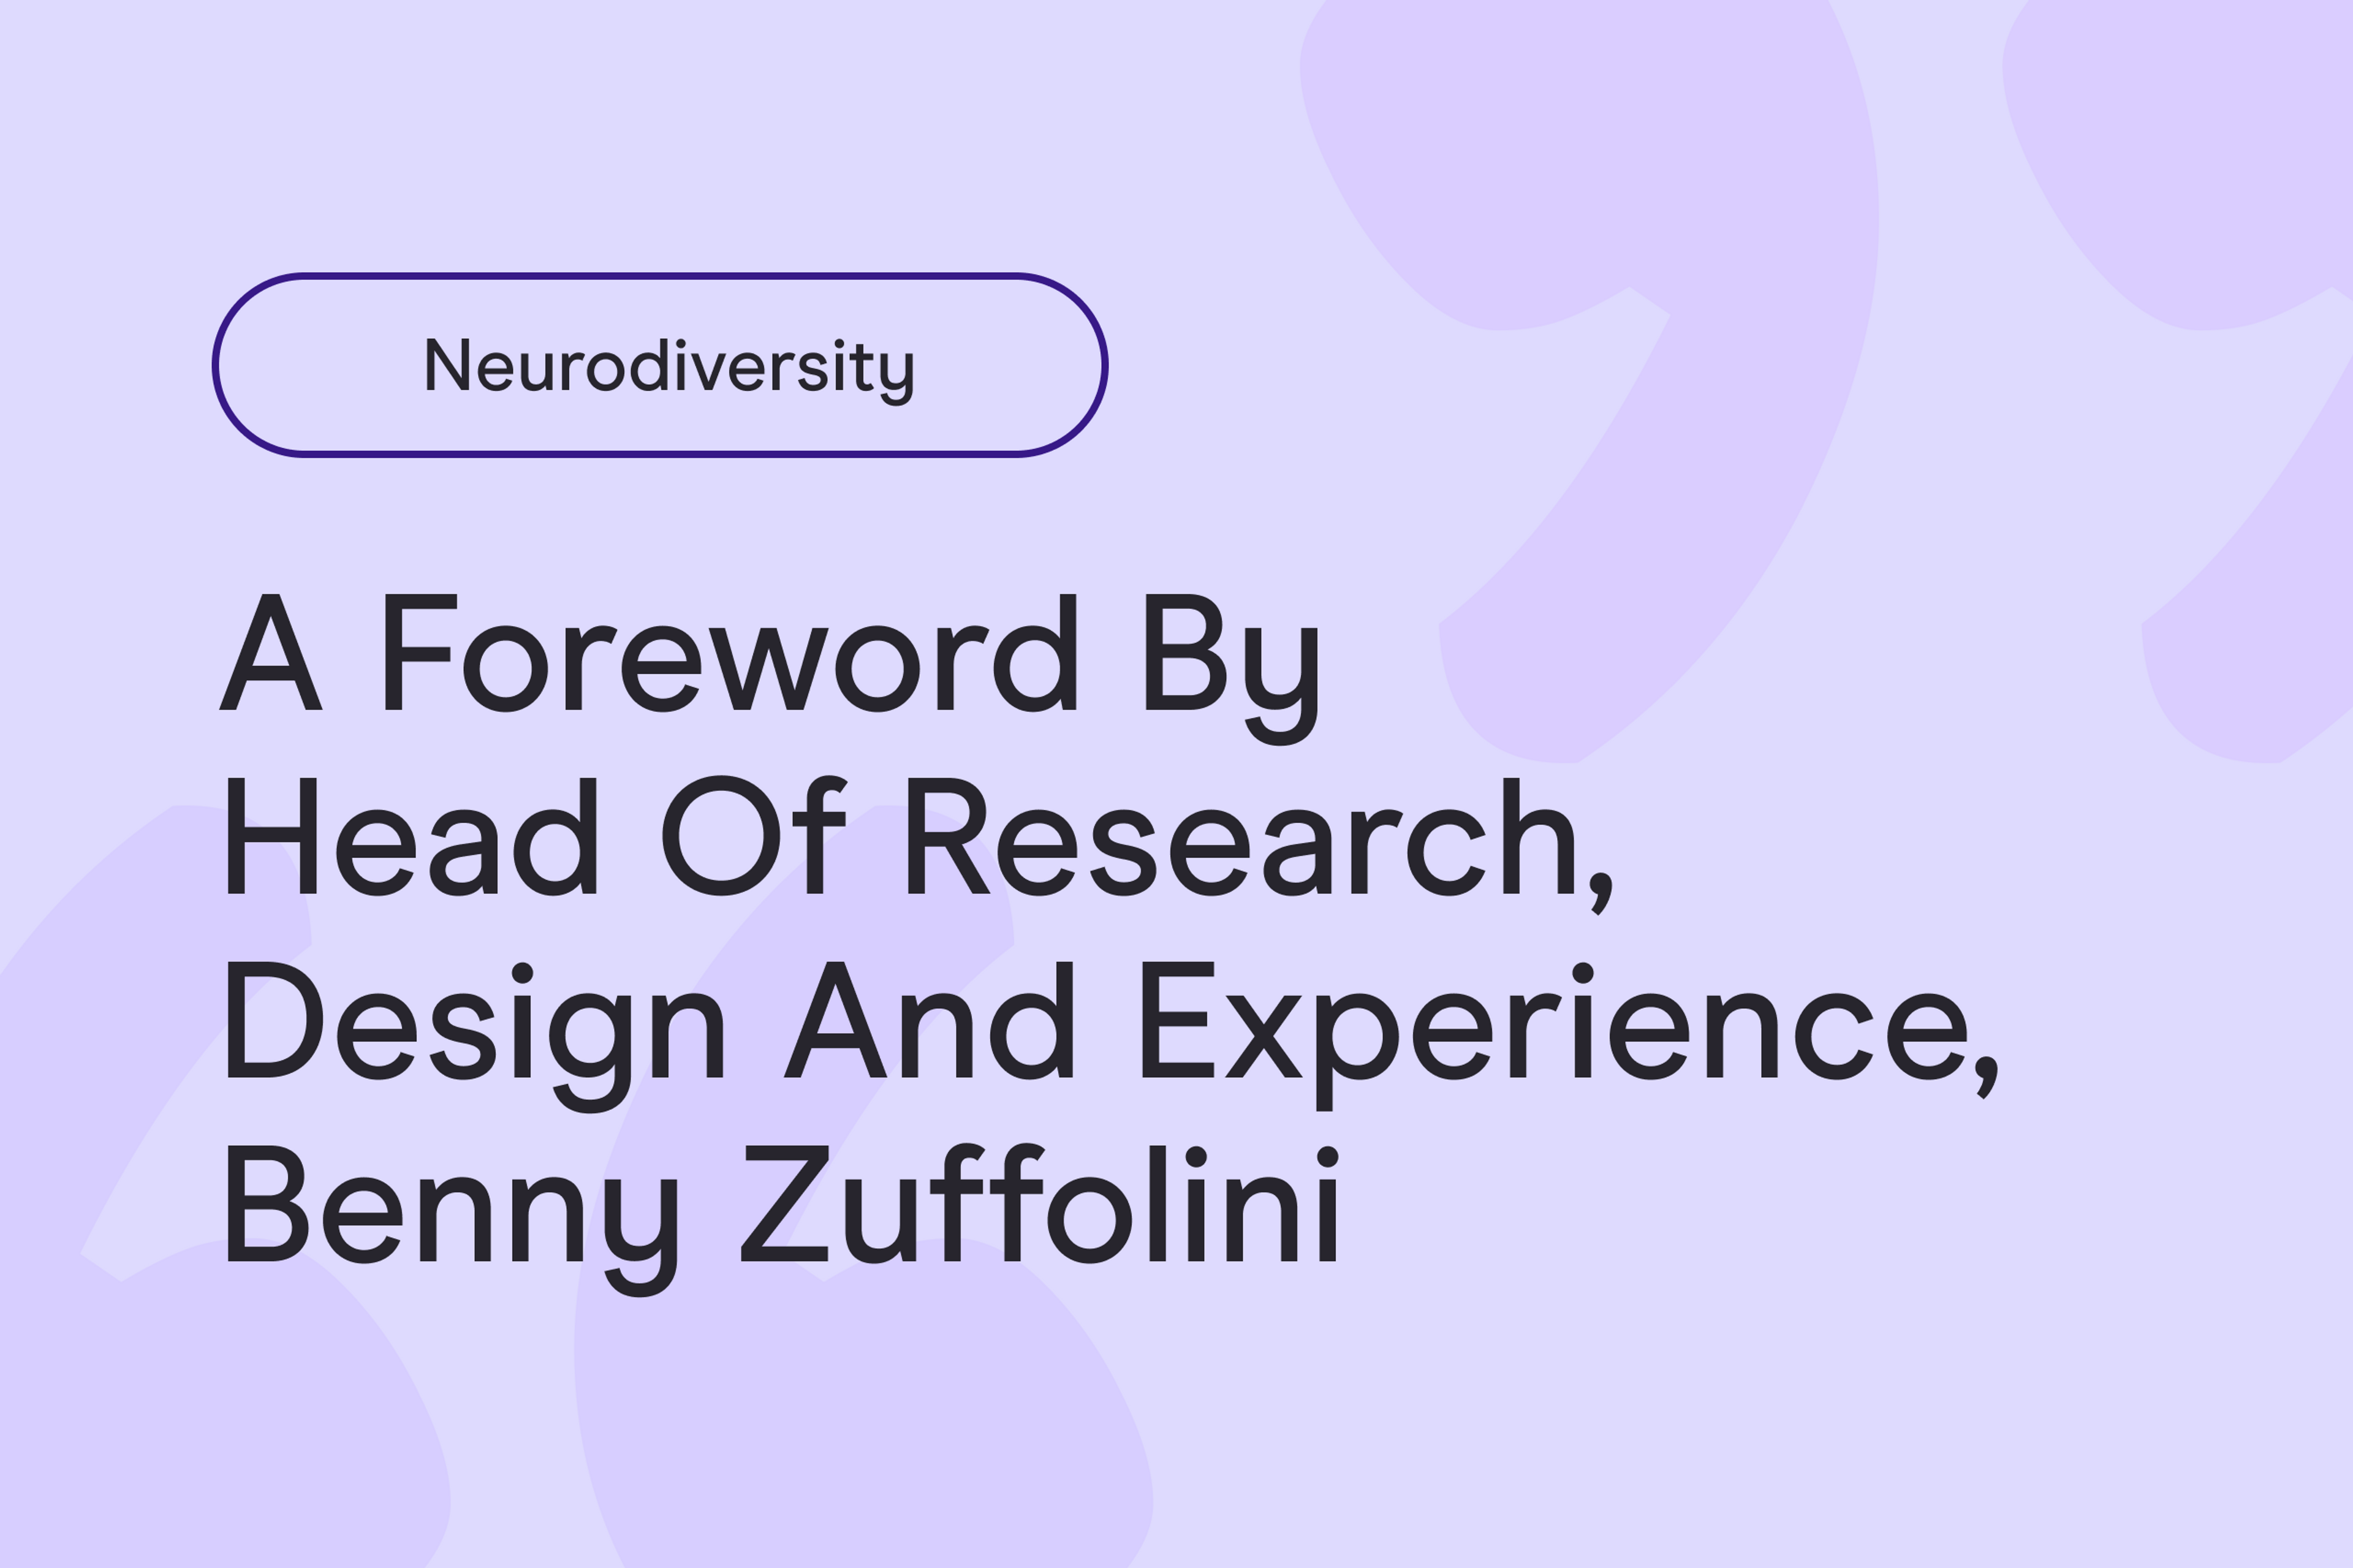 Neurodiversity: a foreword by our Head of Research, Experience and Design, Benny Zuffolini